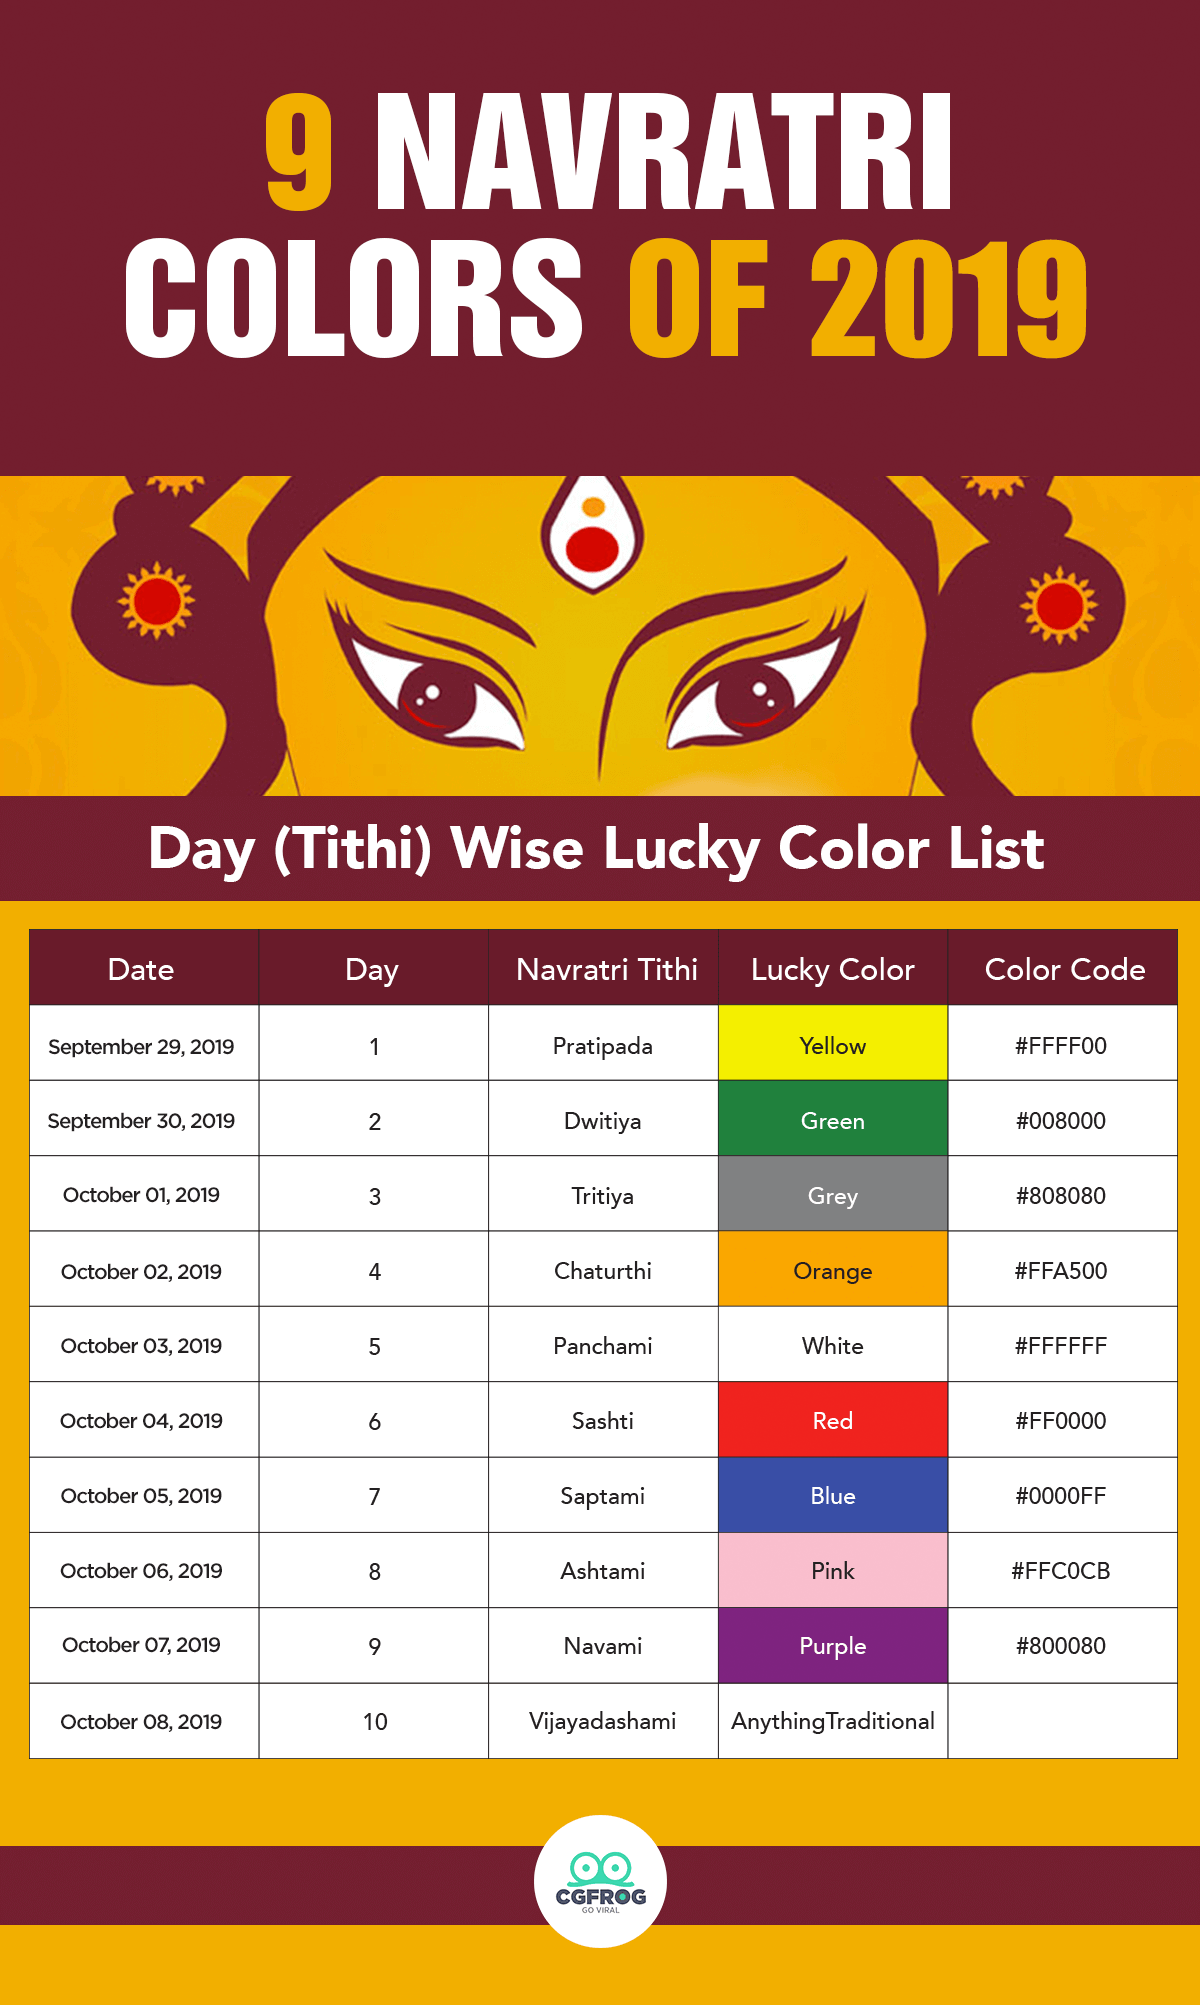 Infographic of 9 Navratri Colors 2019